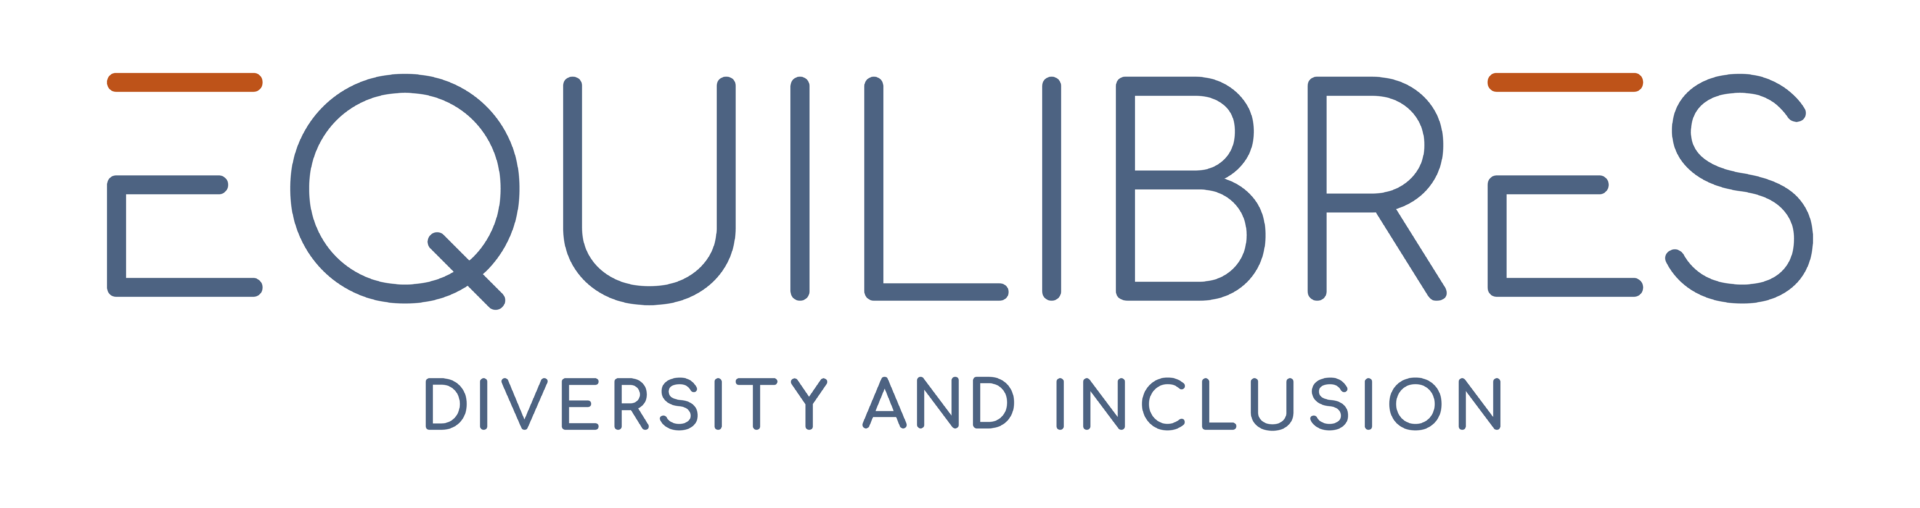 EQUILIBRES - Diversity and inclusion